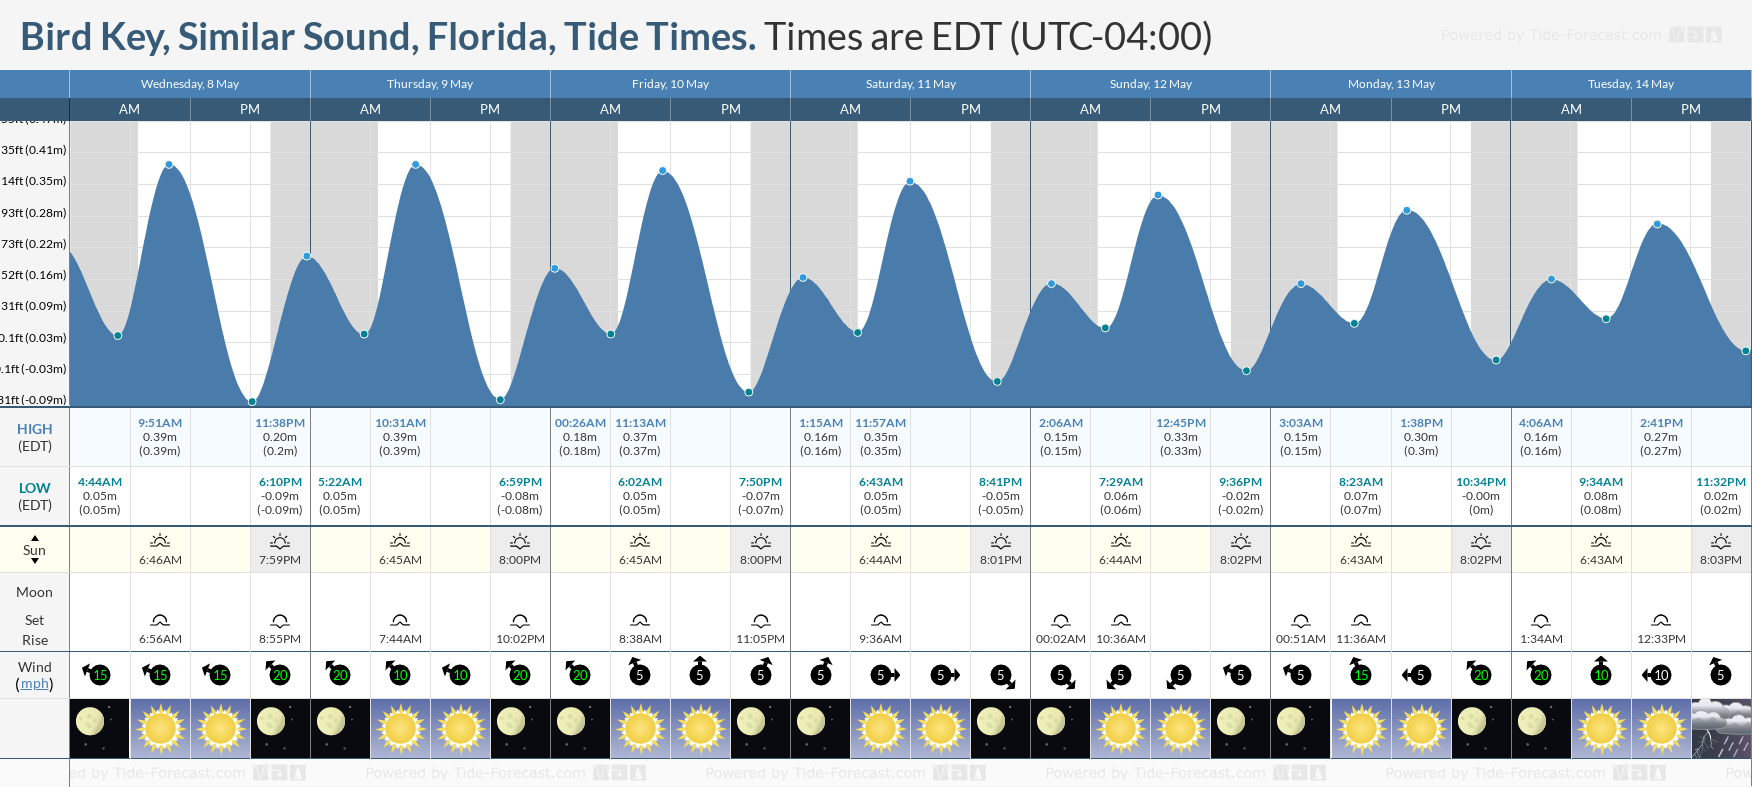 Bird Key, Similar Sound, Florida Tide Chart including high and low tide tide times for the next 7 days